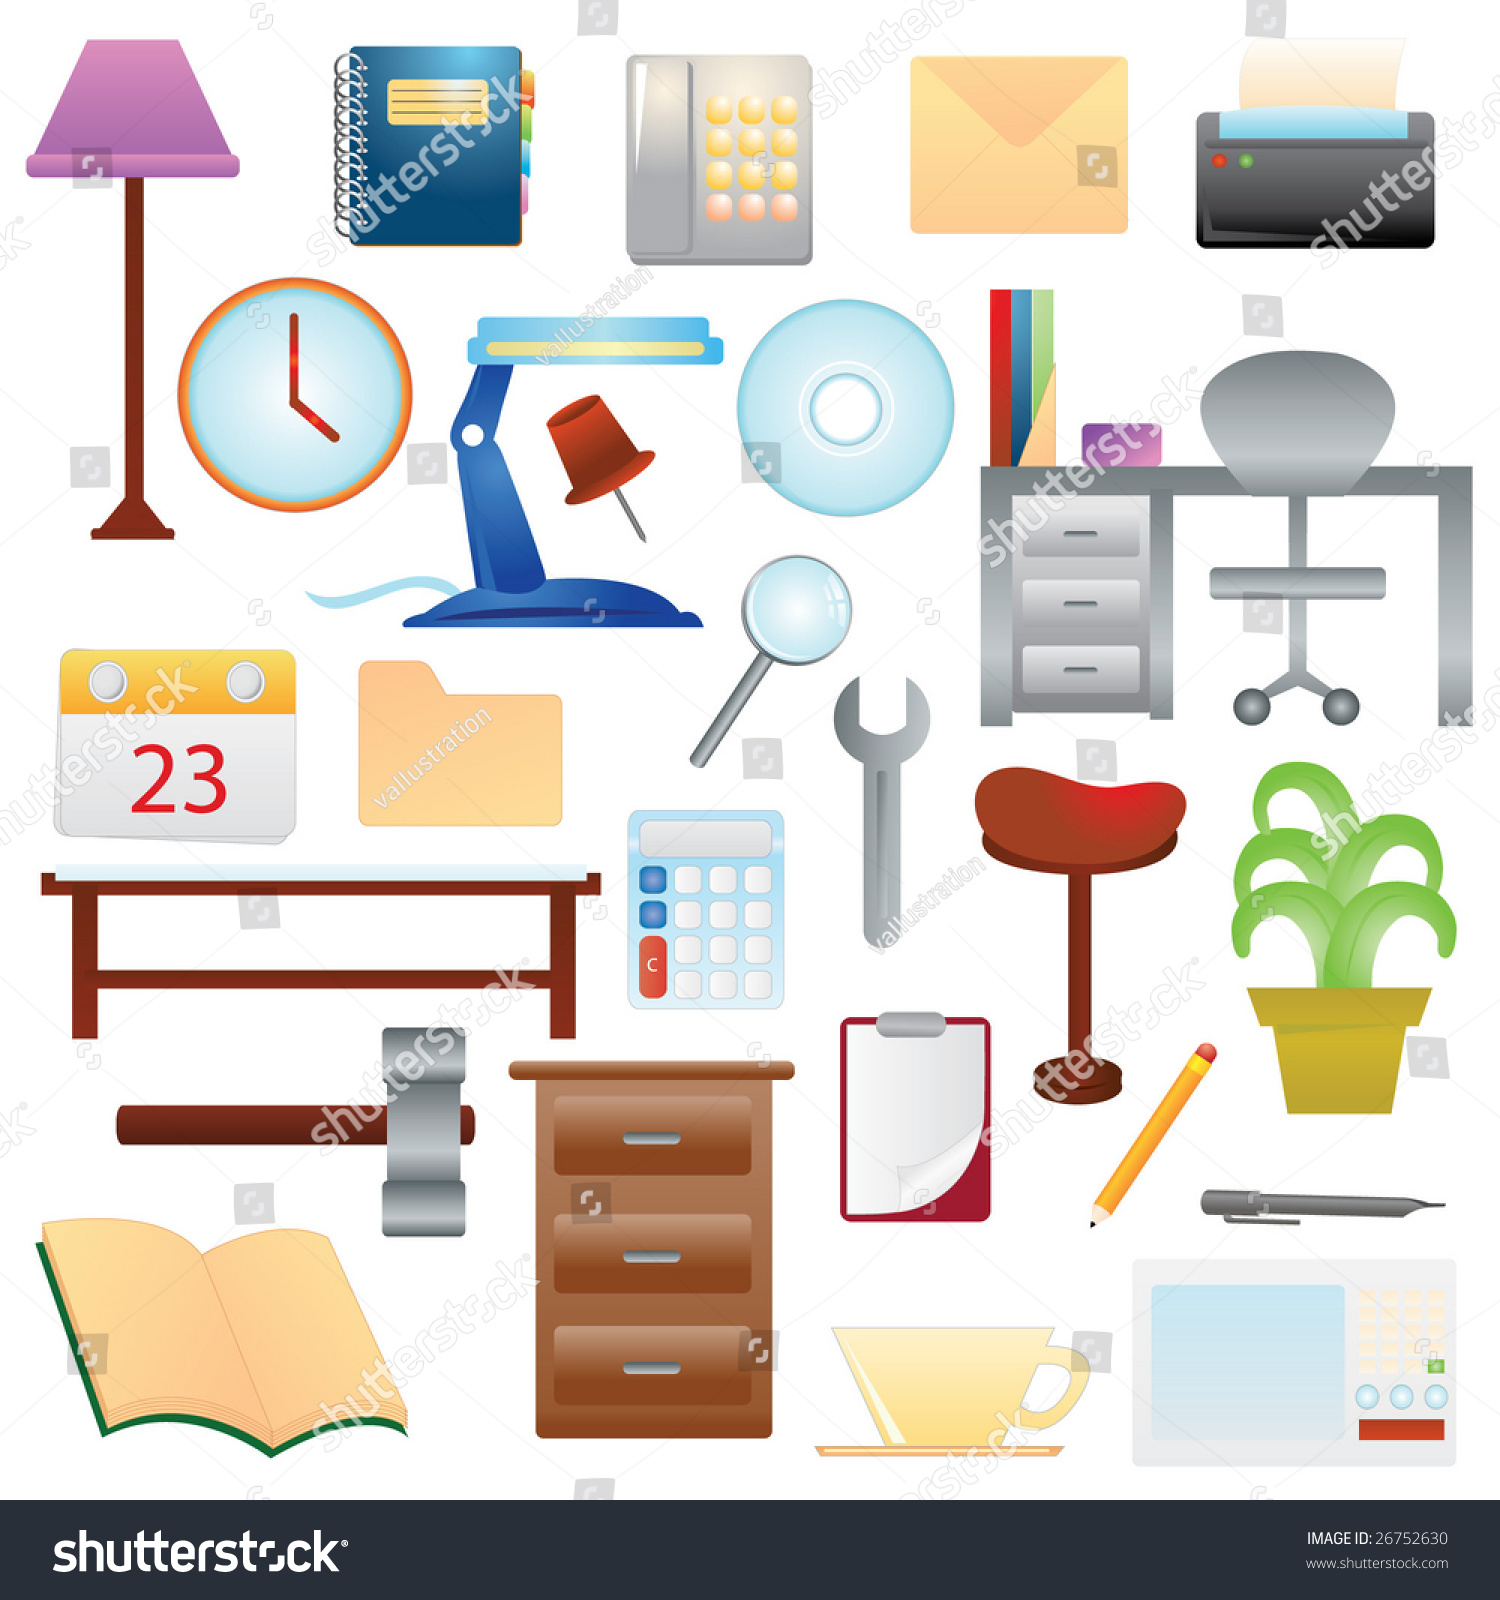 House Hold Items Stock Vector (Royalty Free) 26752630 Shutterstock.